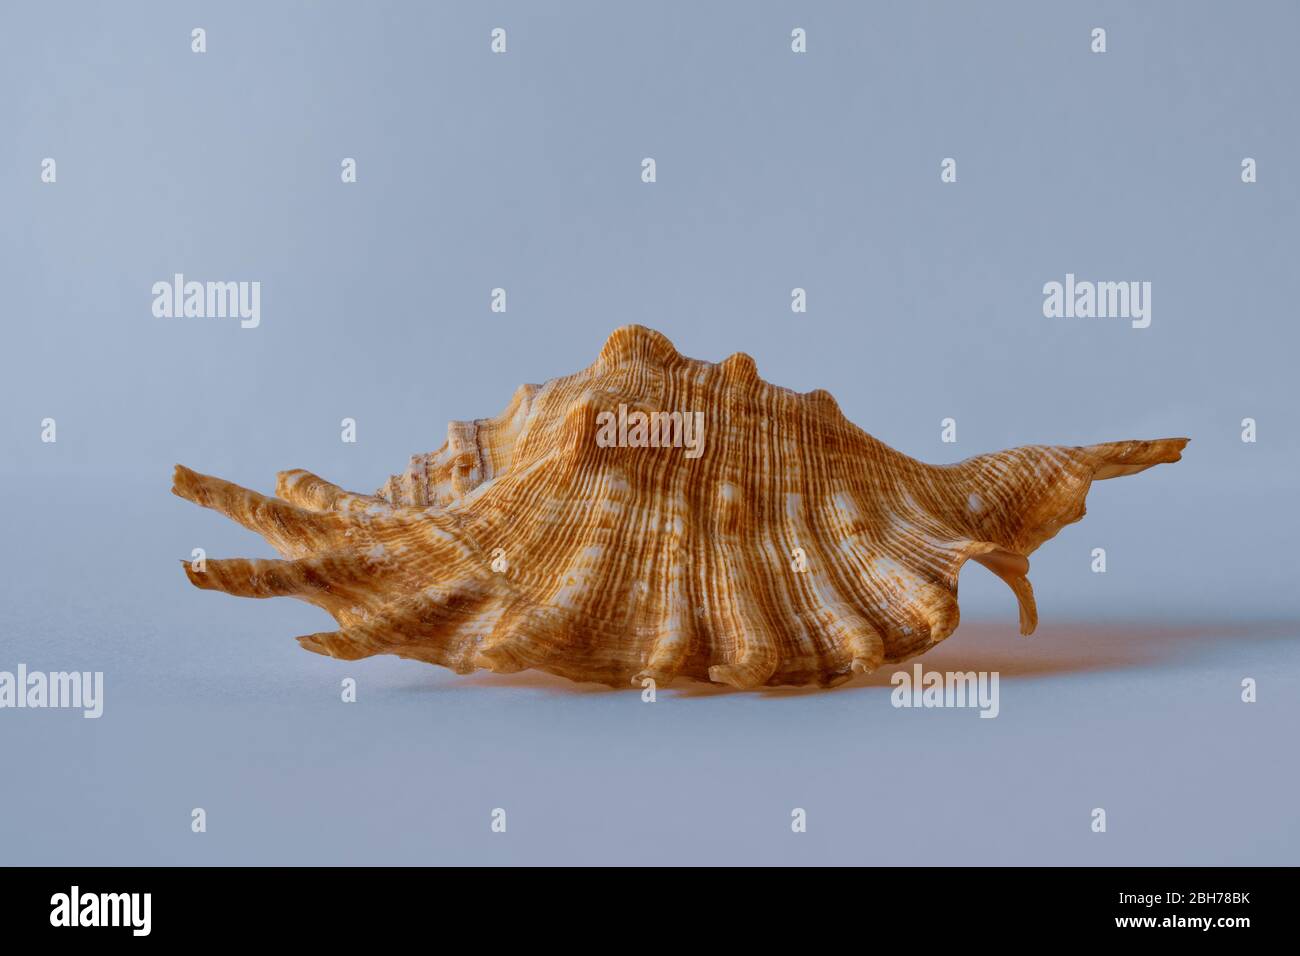 Milleped Spider Conch. Spider Conch. Lambis Millepeda L. Pacific Seashell Stock Photo